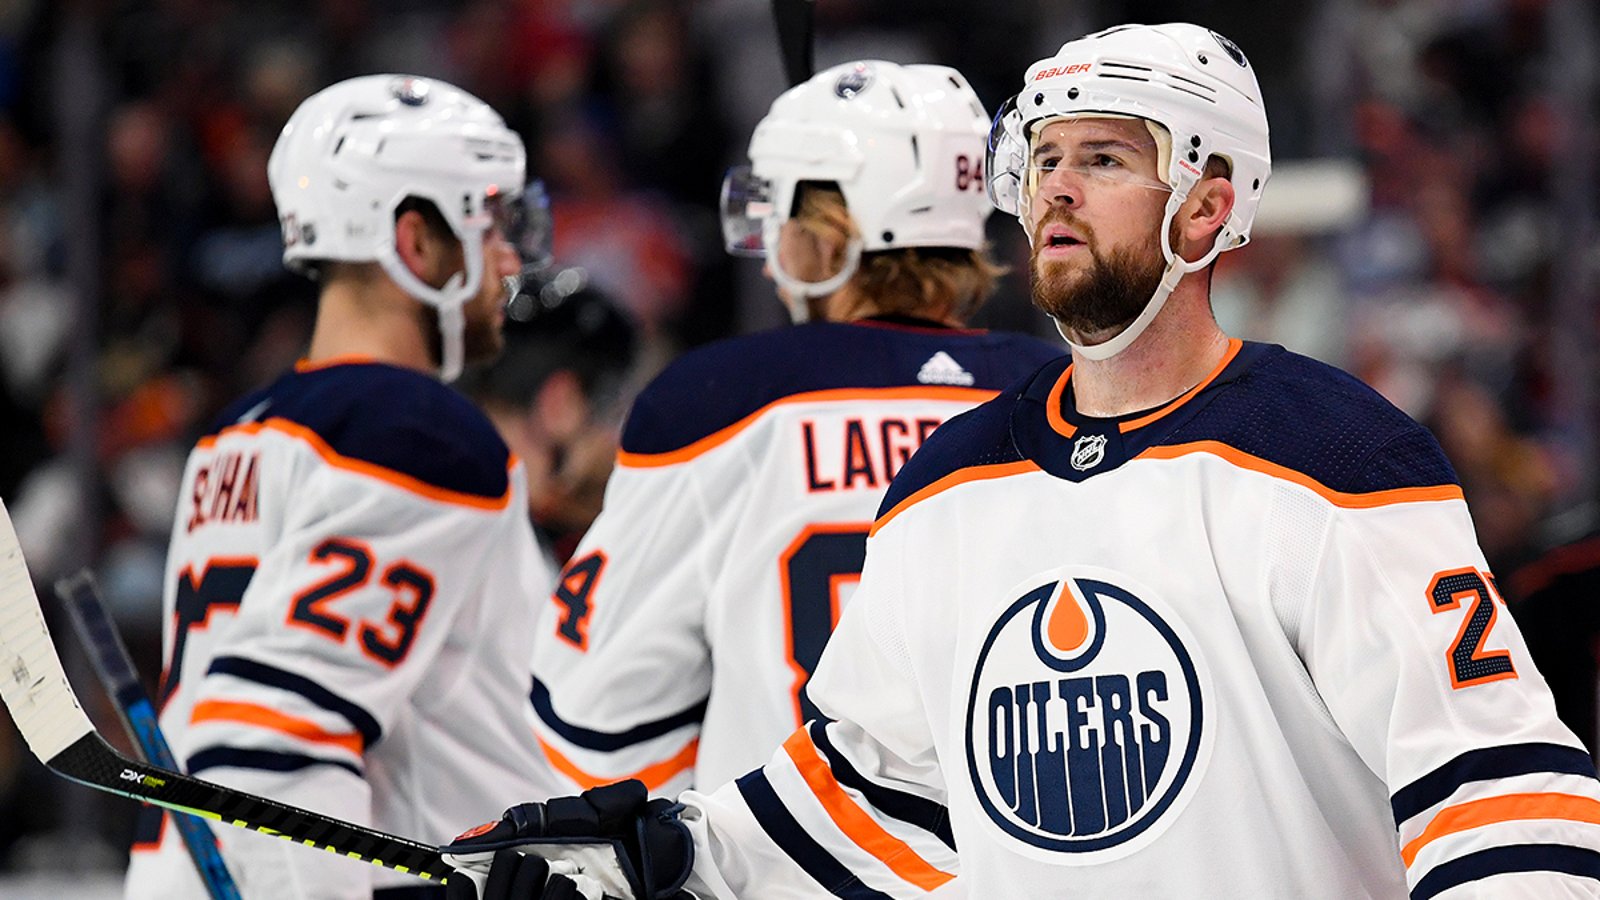 Mike Green opts out of the playoffs, but there is a silver lining for the Oilers.